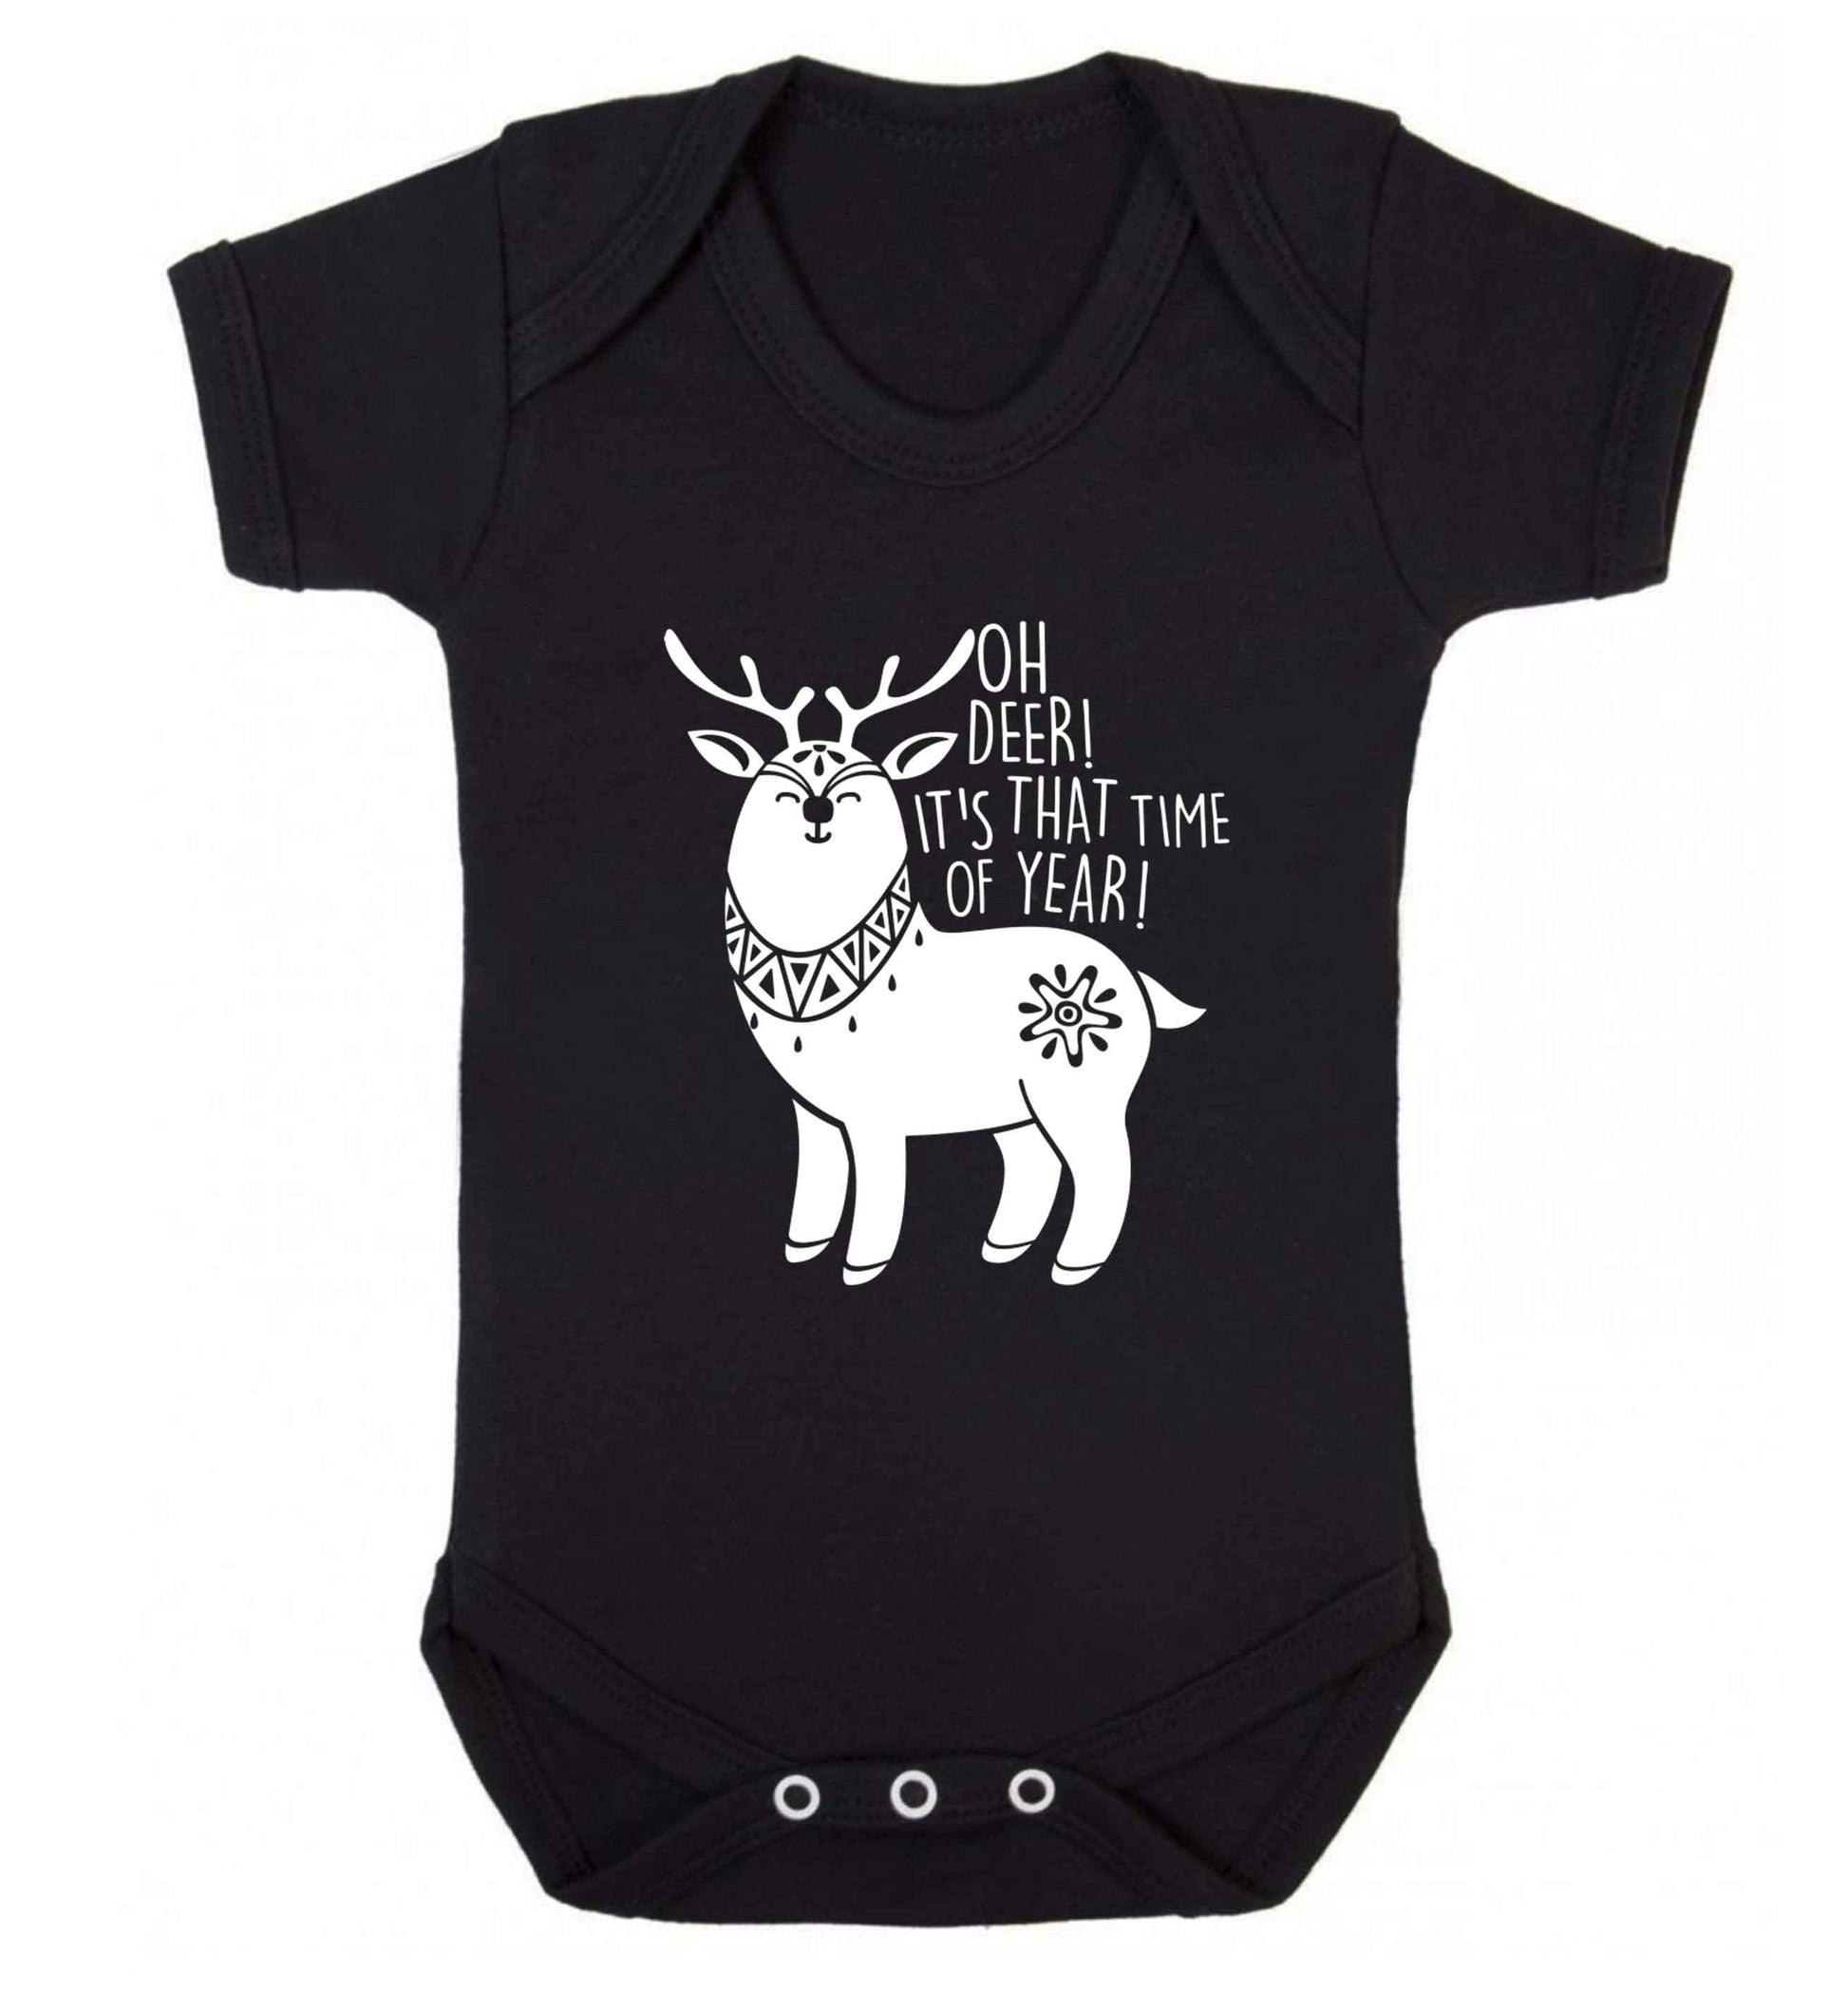 Oh dear it's that time of year Baby Vest black 18-24 months